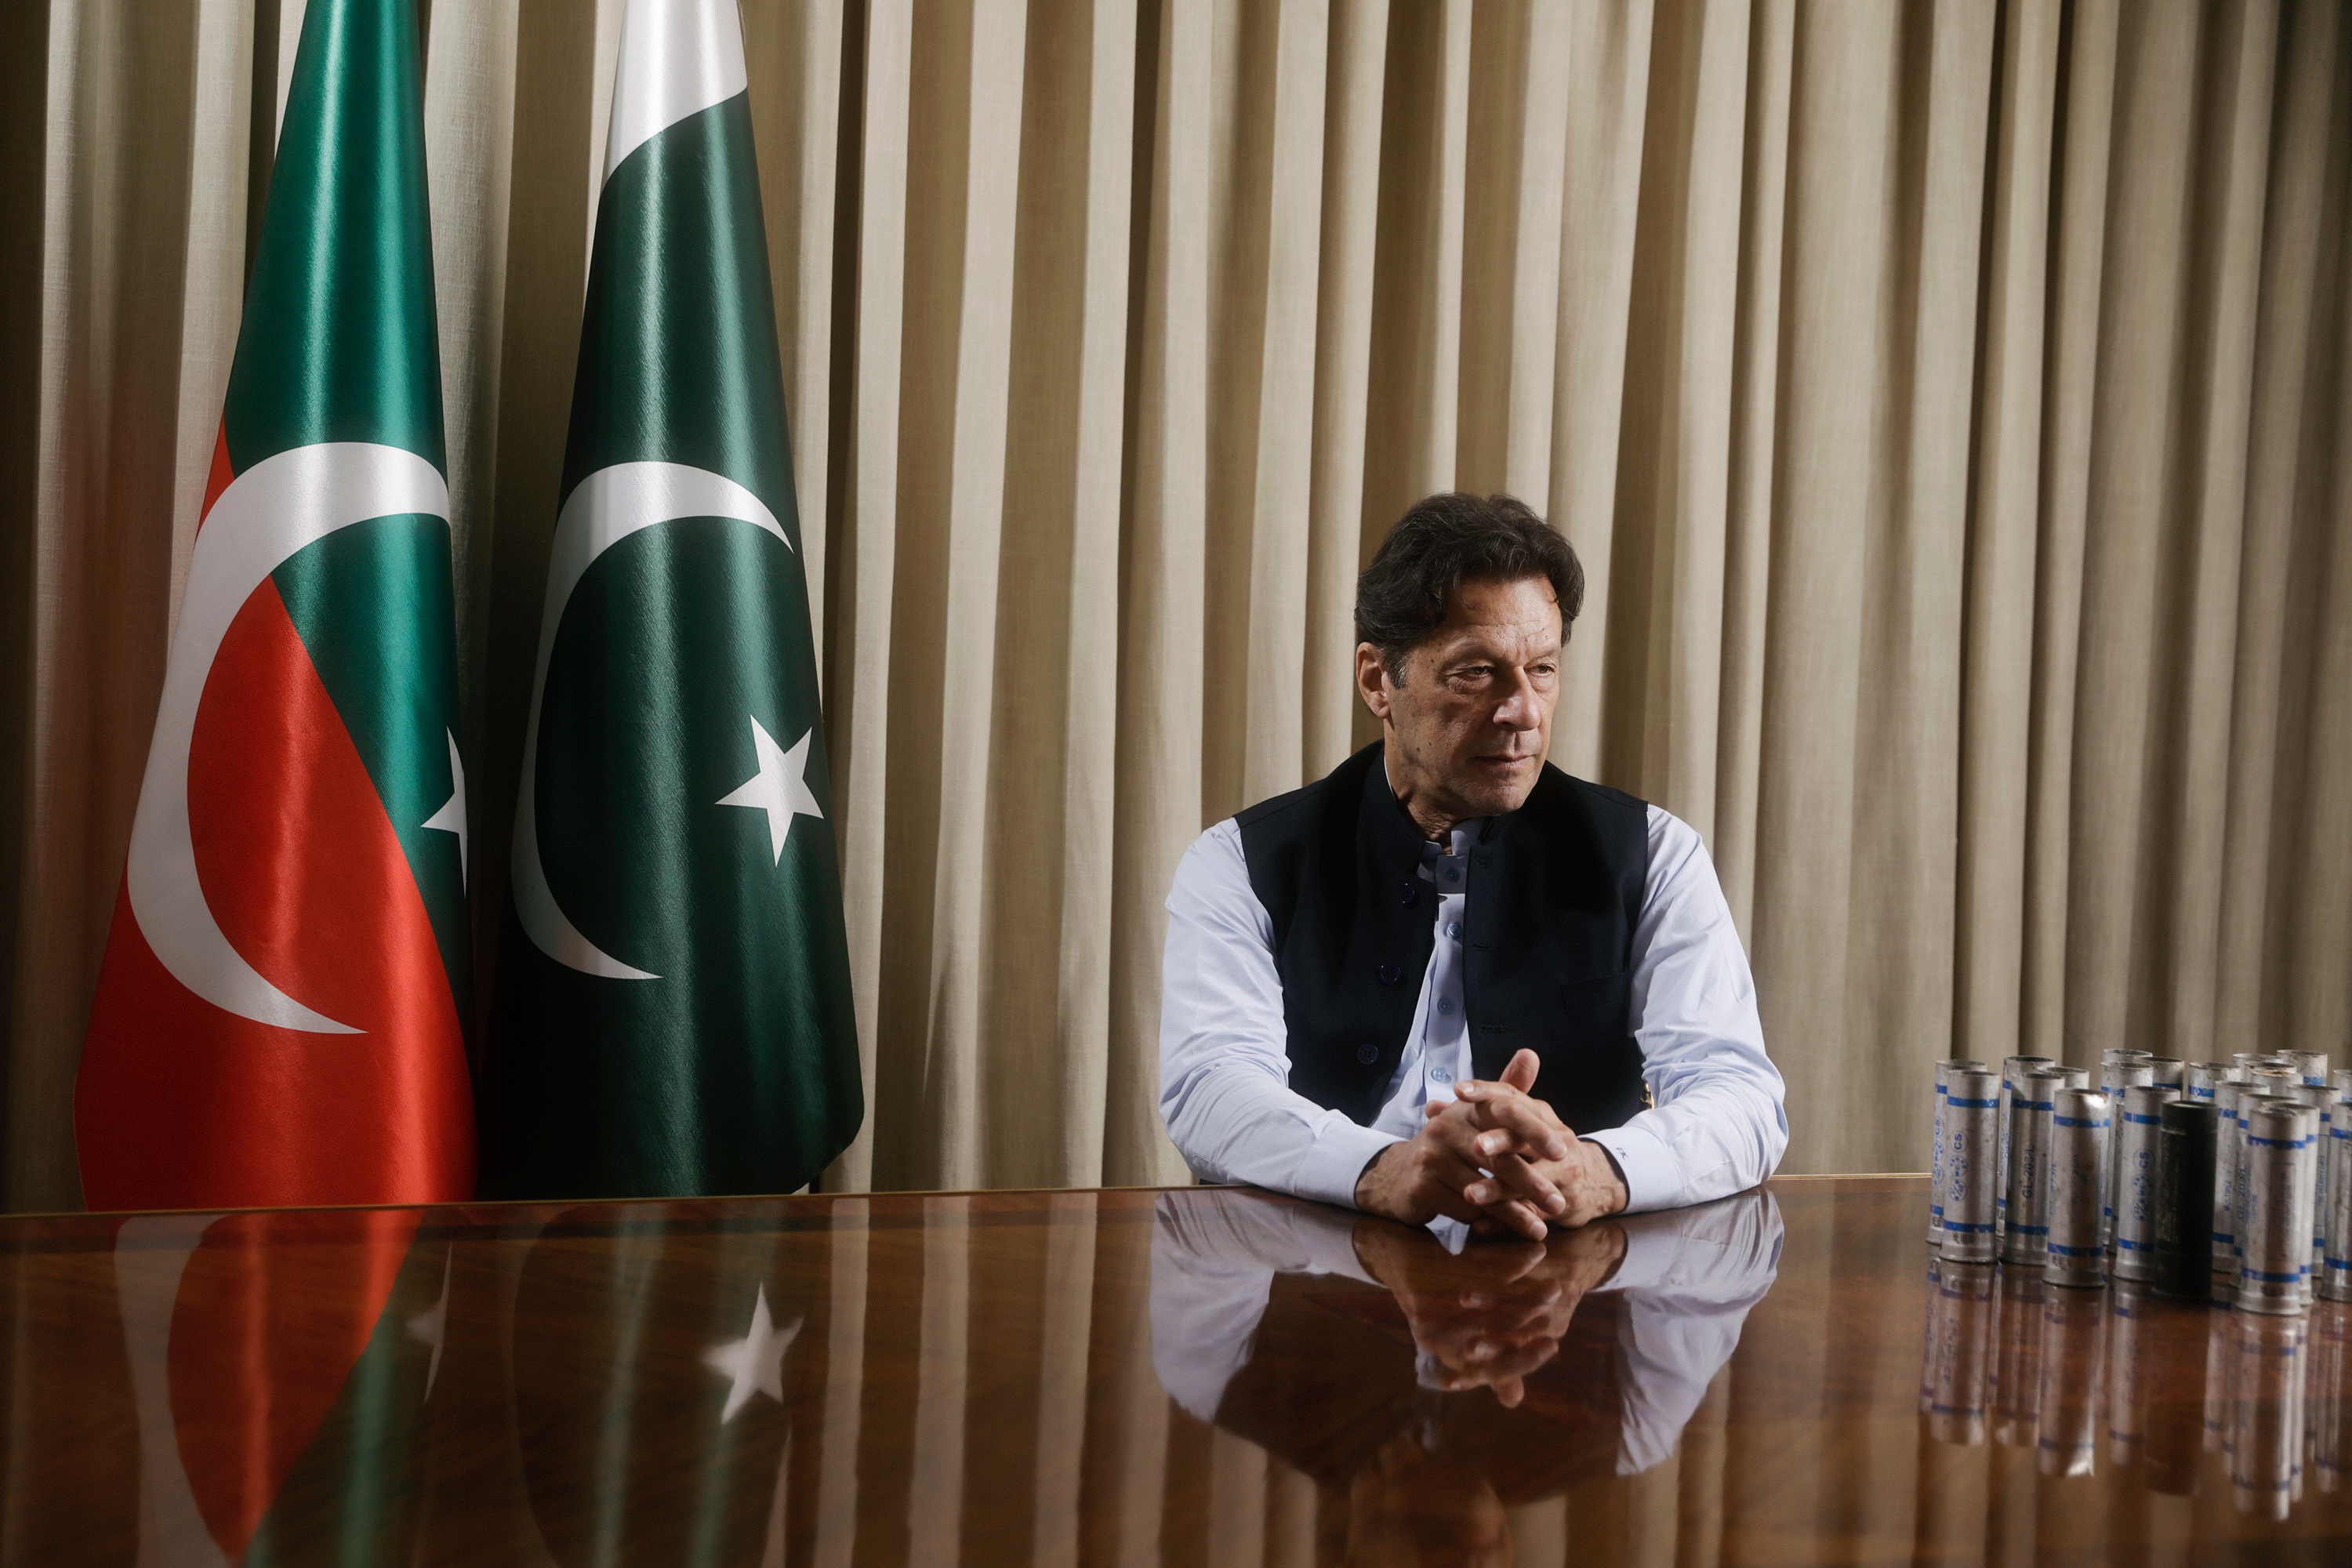 Former Pakistan Prime Minister Imran Khan sits for a portrait in his Lahore residence on March 28. Next to Khan are tear gas canisters he says were thrown at his house. (Umar Nadeem for TIME)